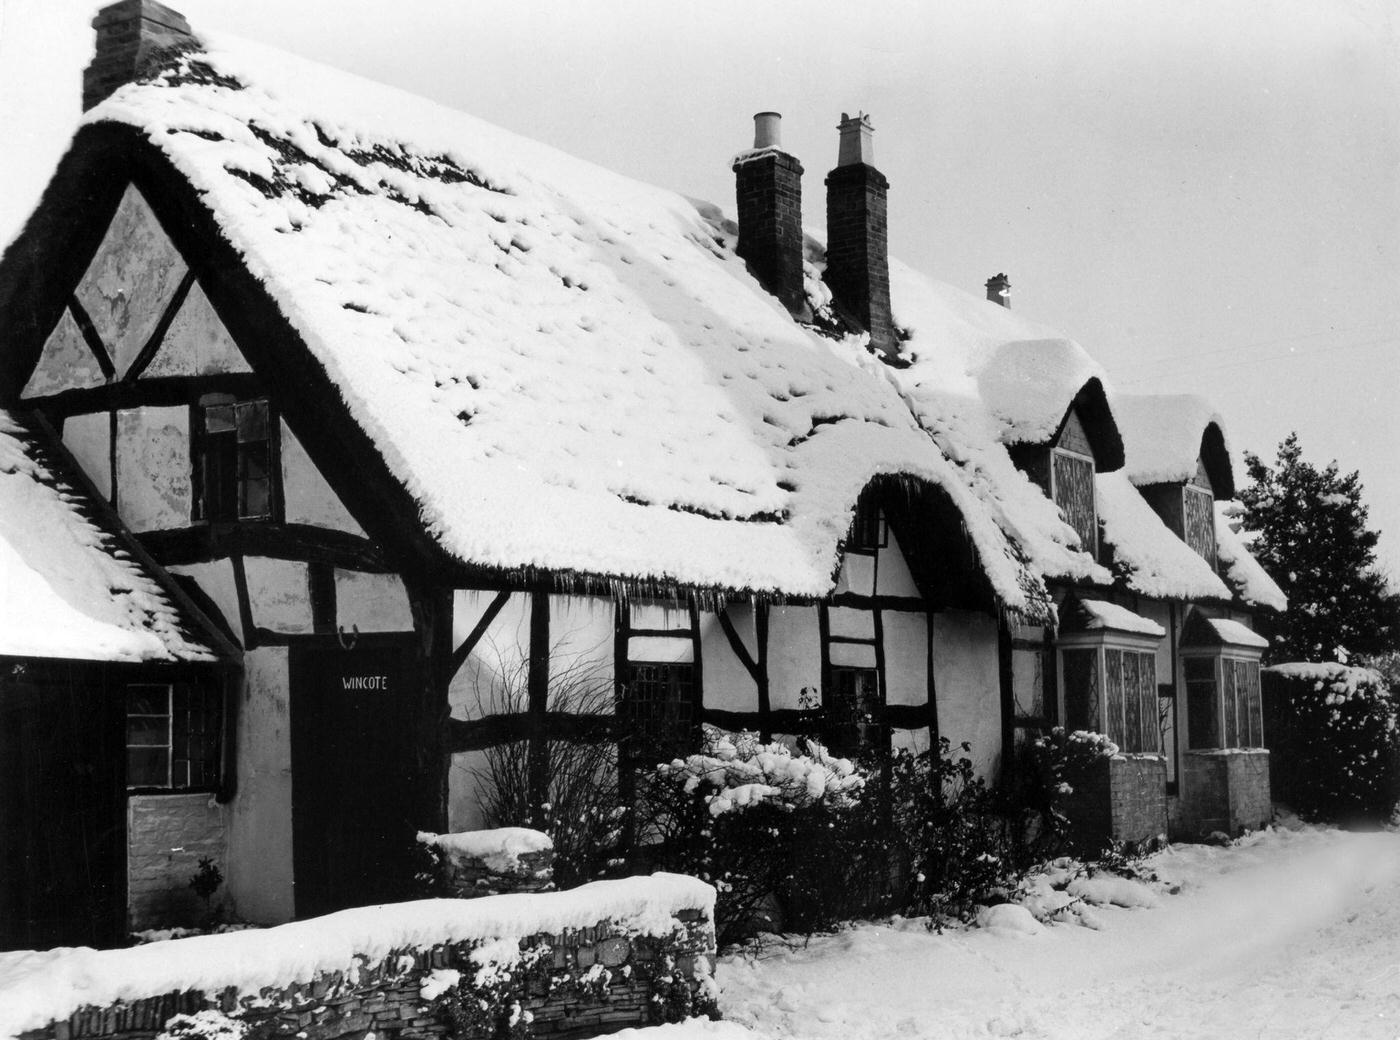 England. A wintry scene at Welford with snow and icicles hanging from a thatched roof cottage.